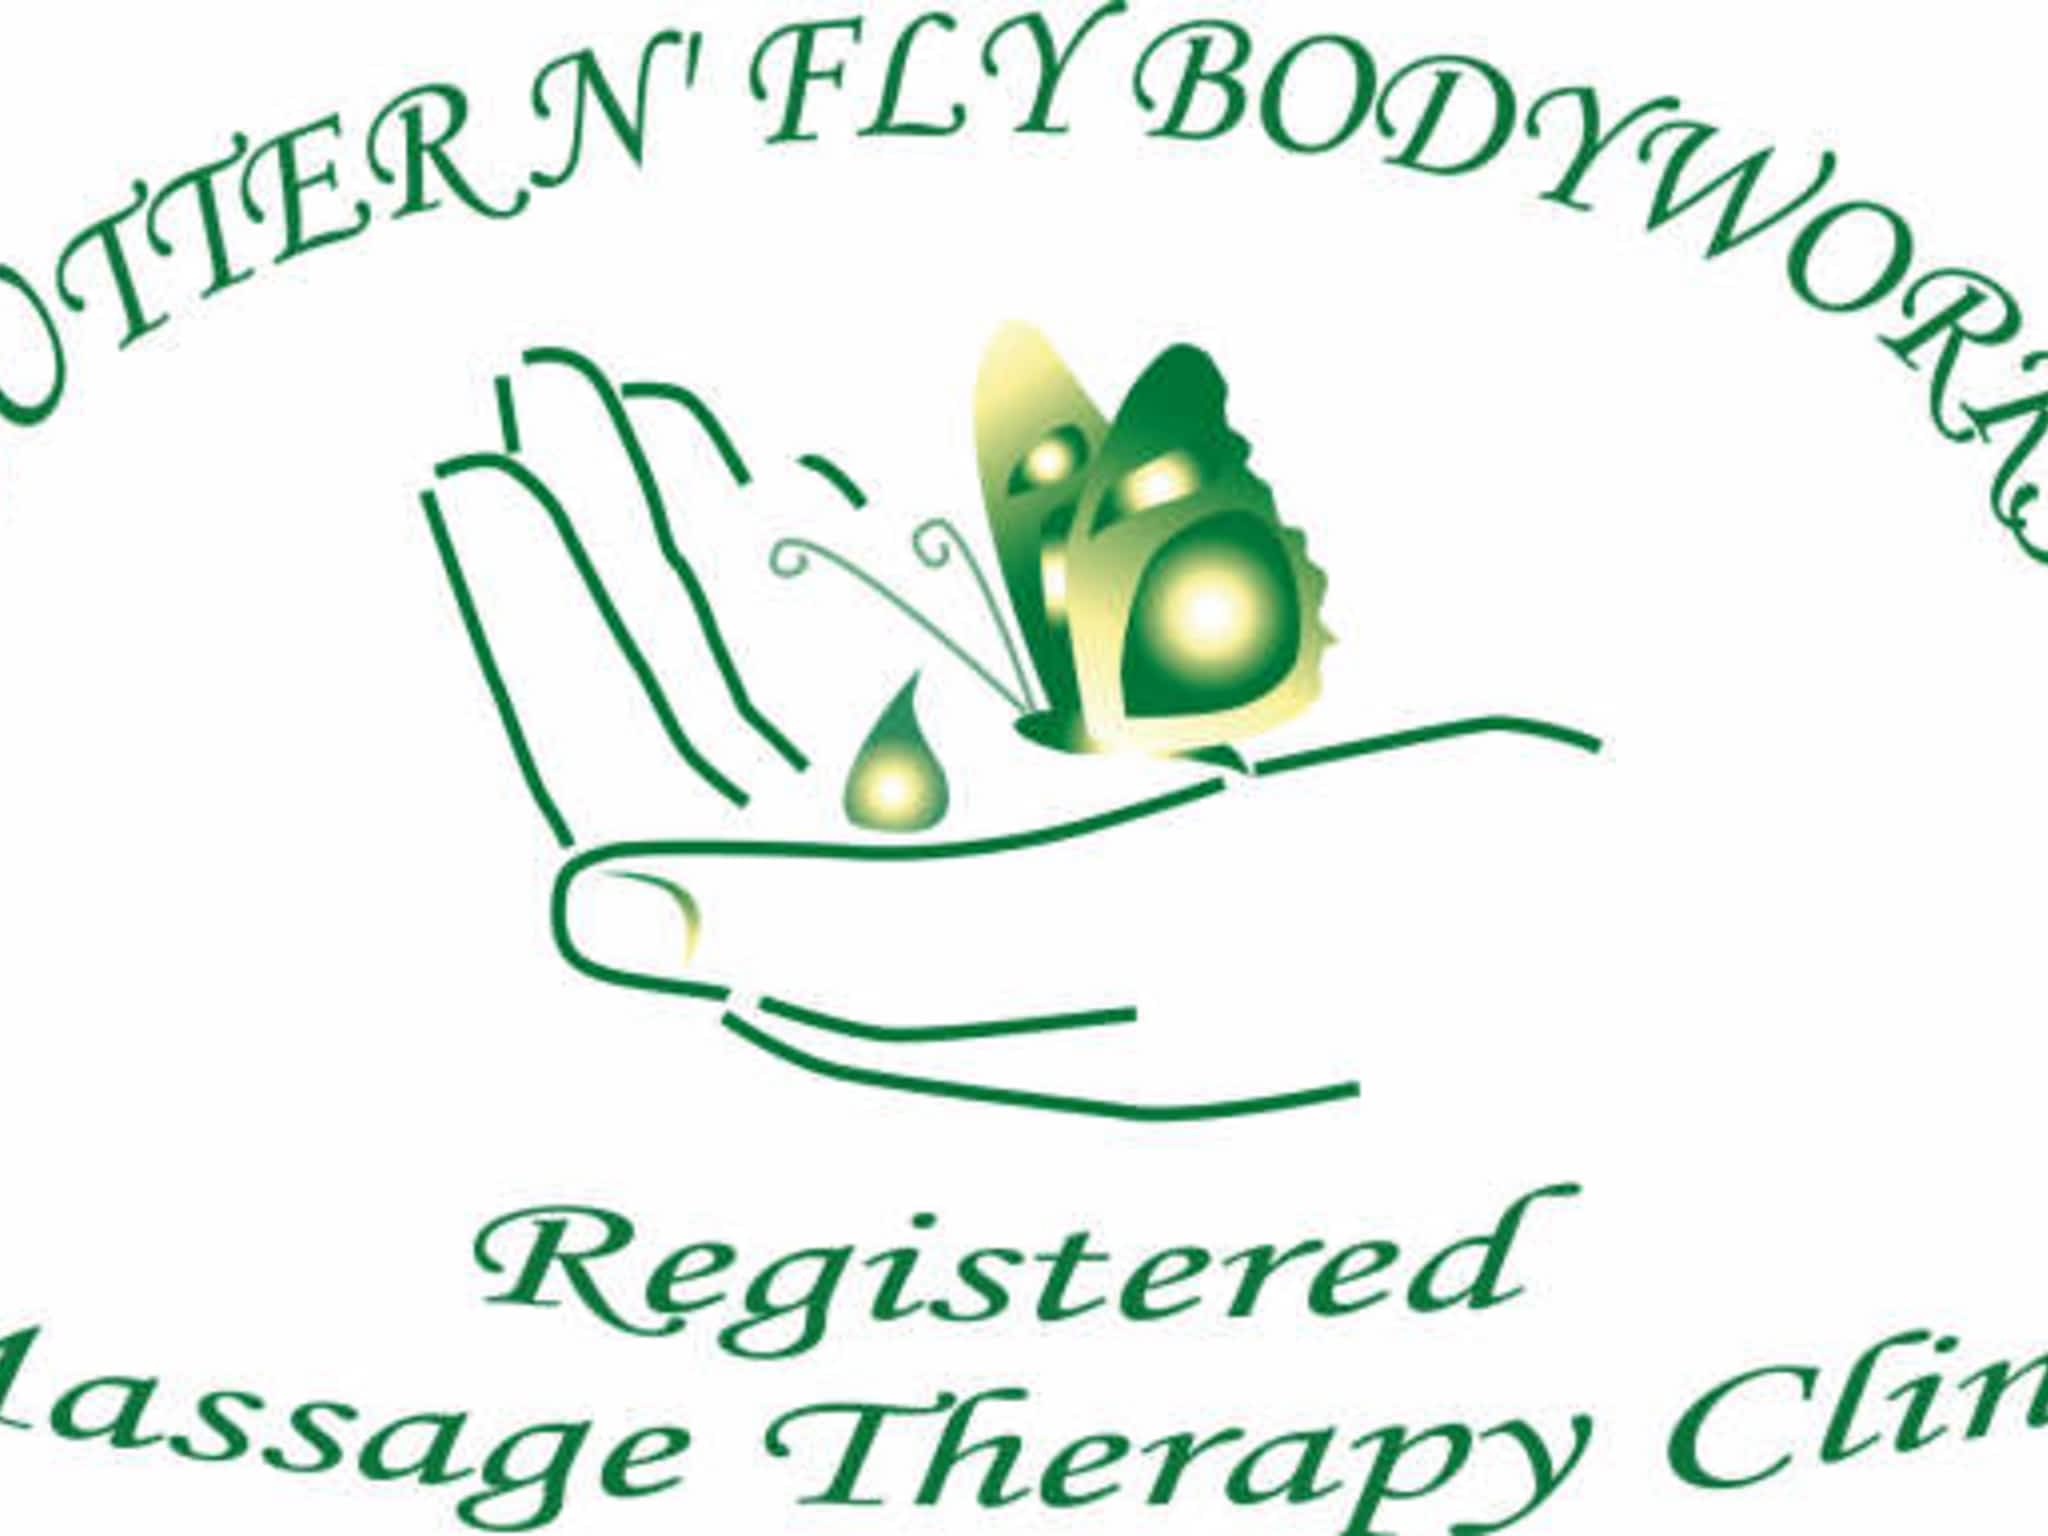 photo Butter N' Fly Bodyworks RMT Clinic